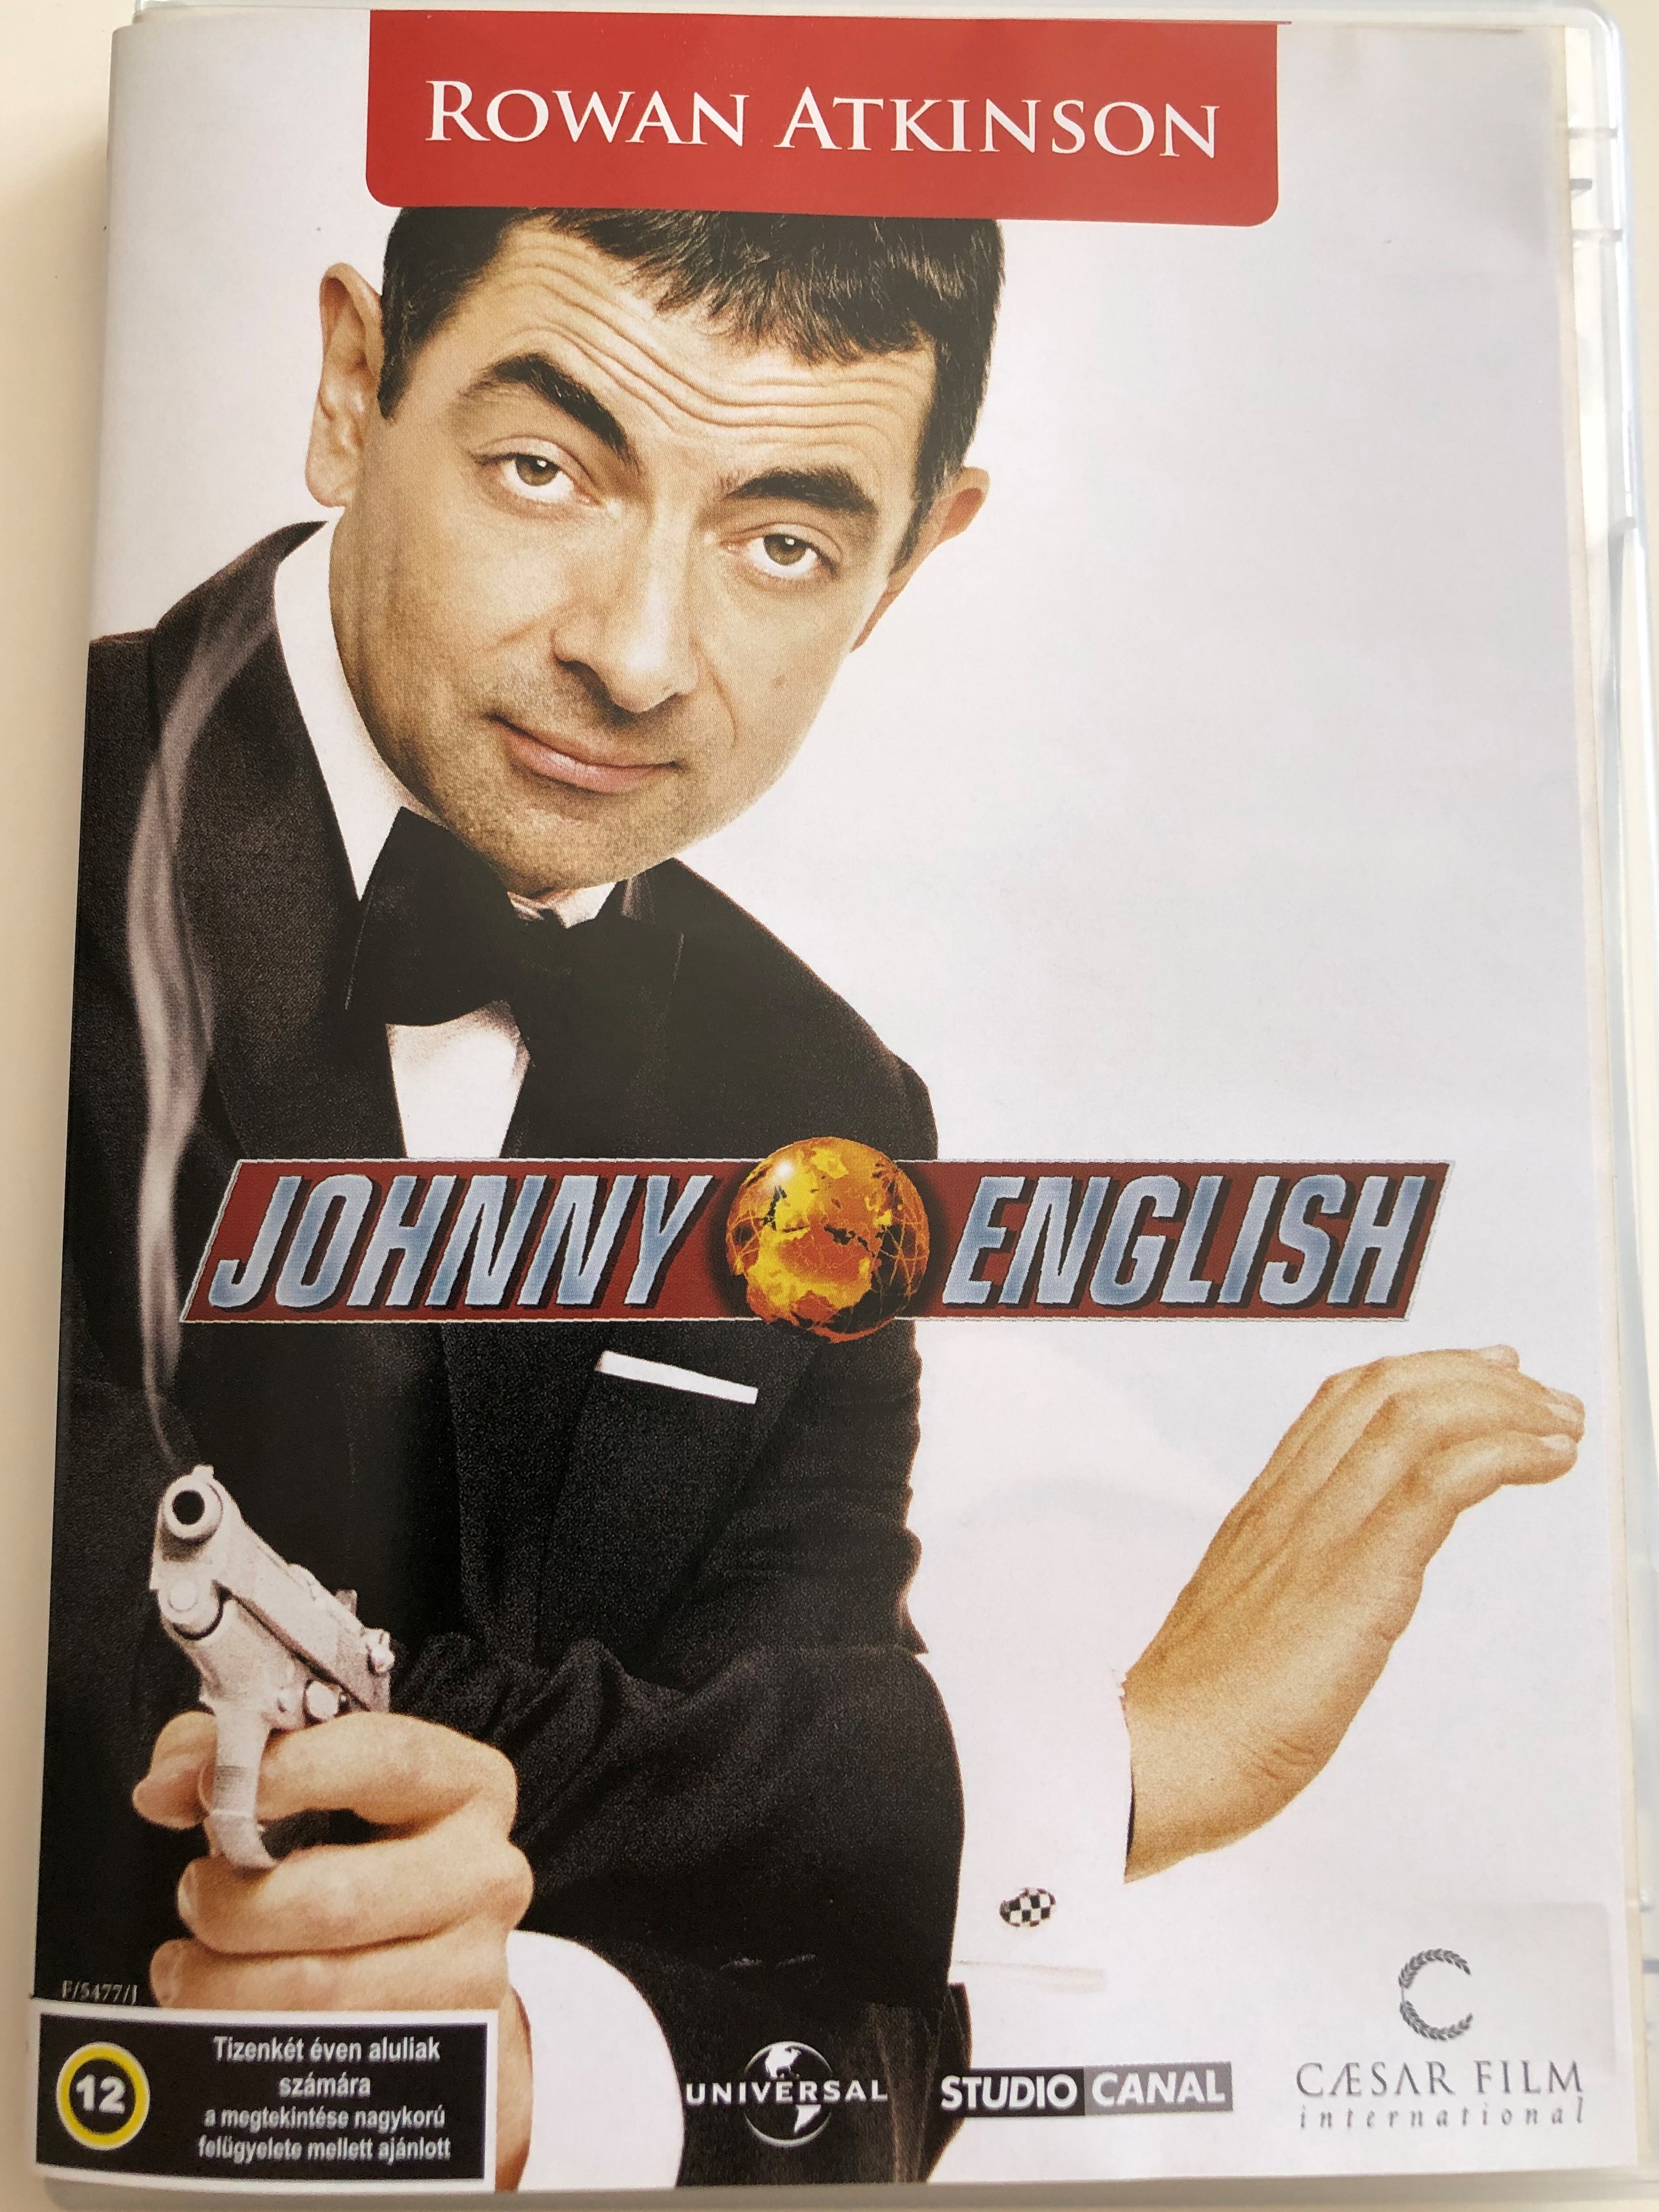 Johnny English DVD 2003 / Directed by Peter Howit / Starring: Rowan  Atkinson - Bible in My Language